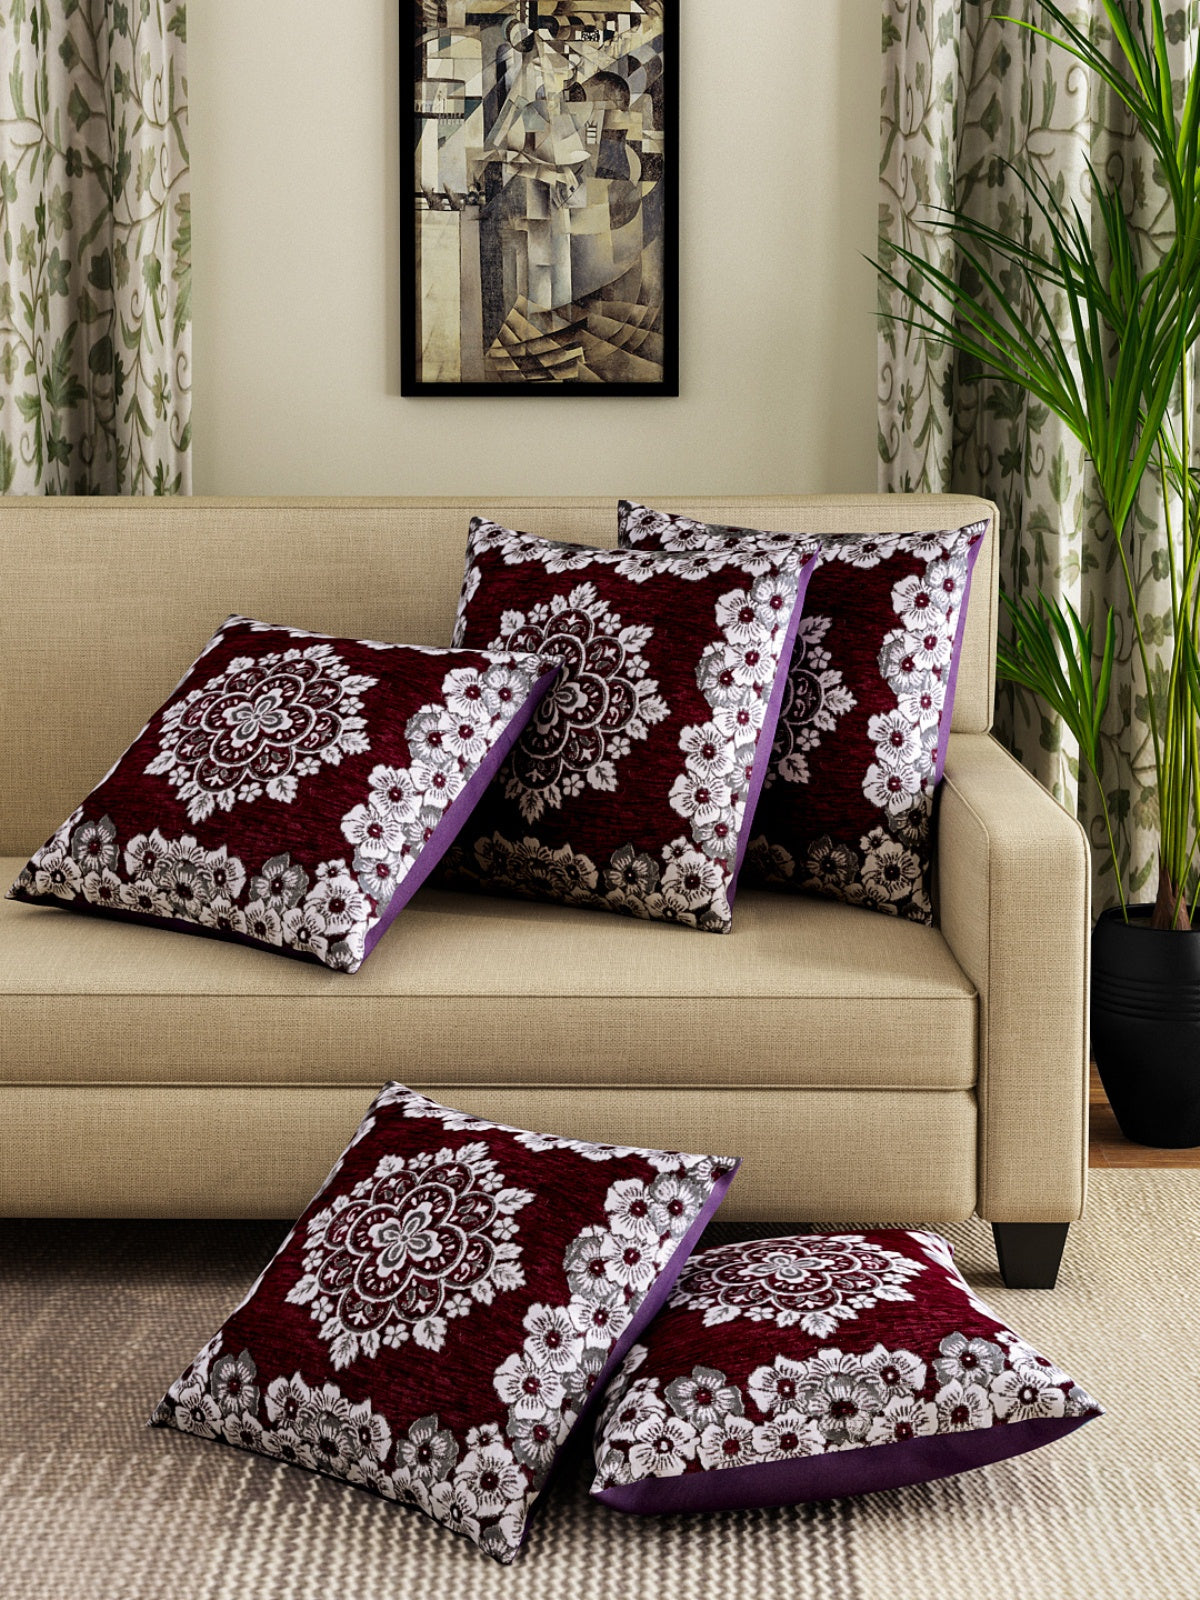 Polyester Chenille Floral Cushion Covers 16x16 inch Set of 5 - Purple